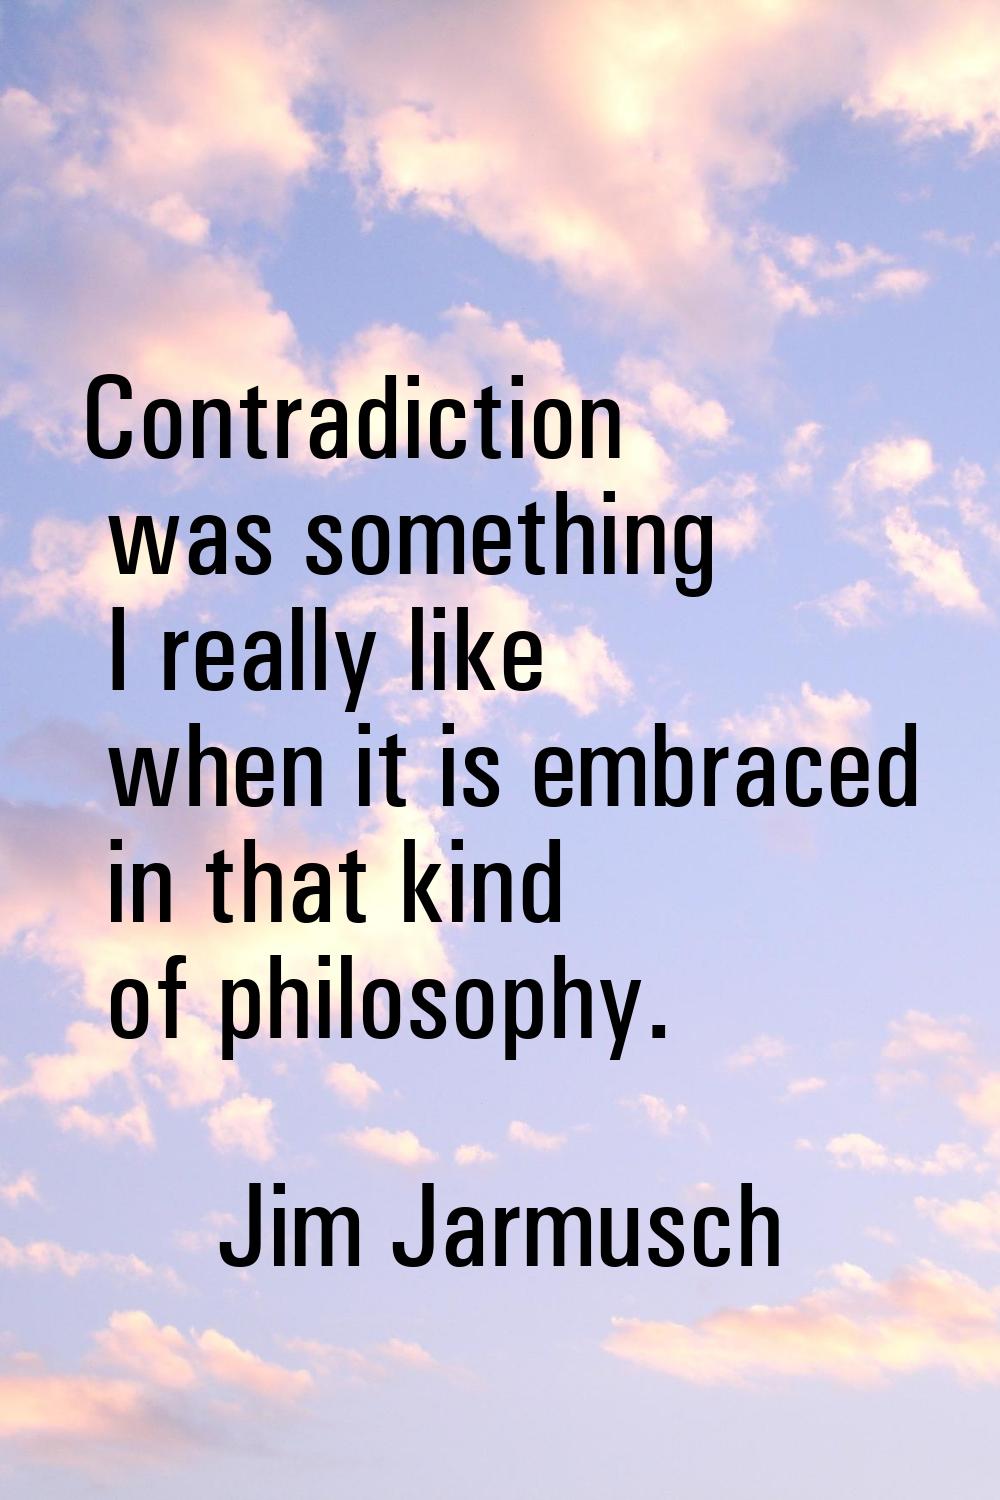 Contradiction was something I really like when it is embraced in that kind of philosophy.